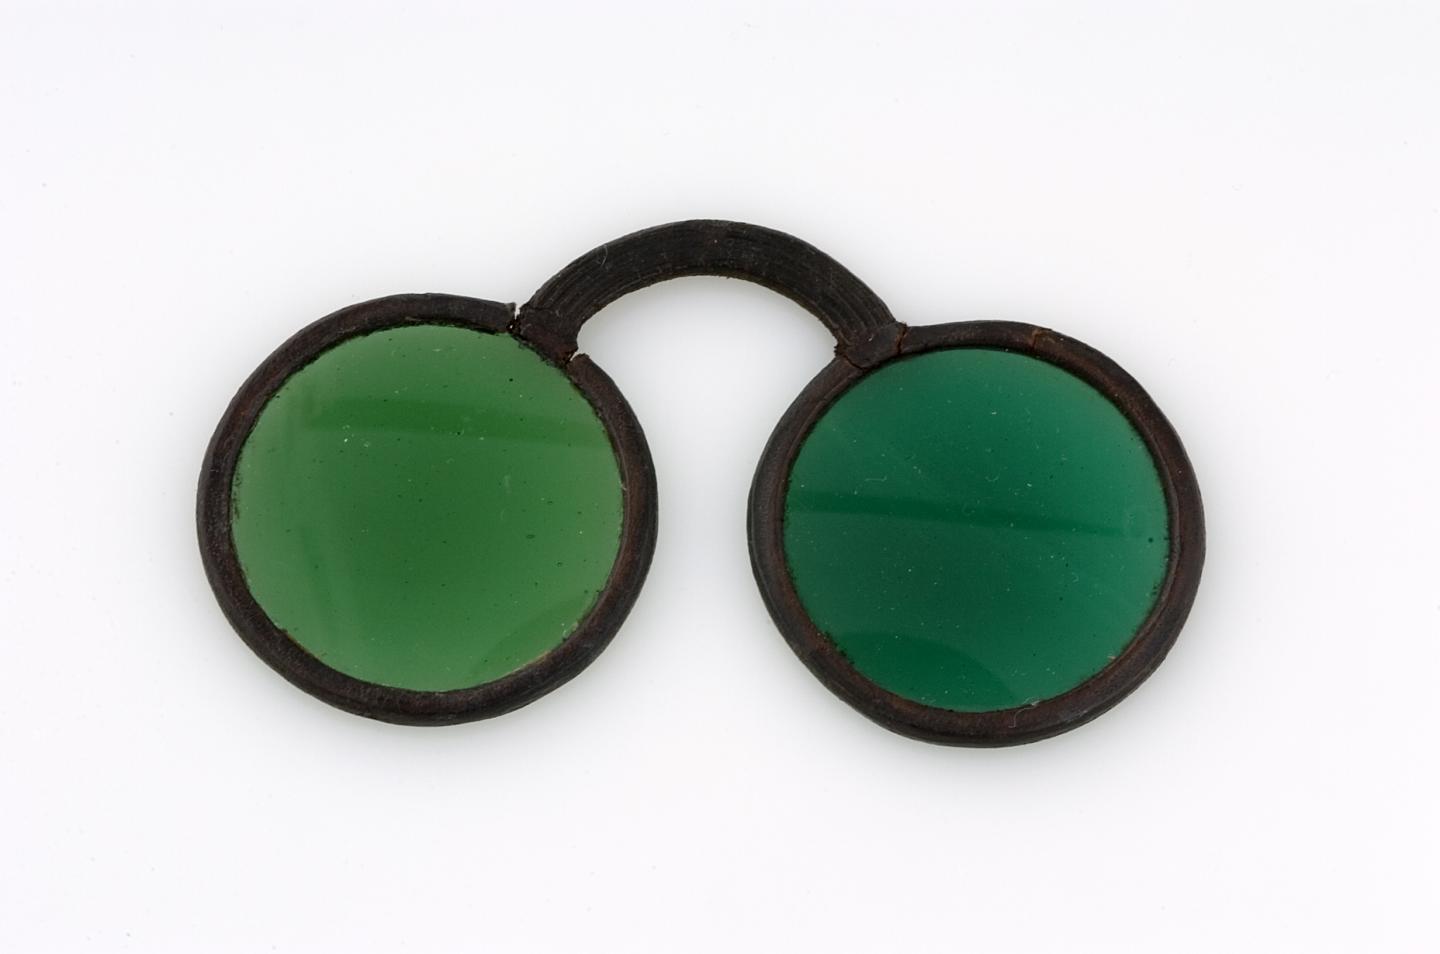 Green-tinted spectacles (The College of Optometrists)